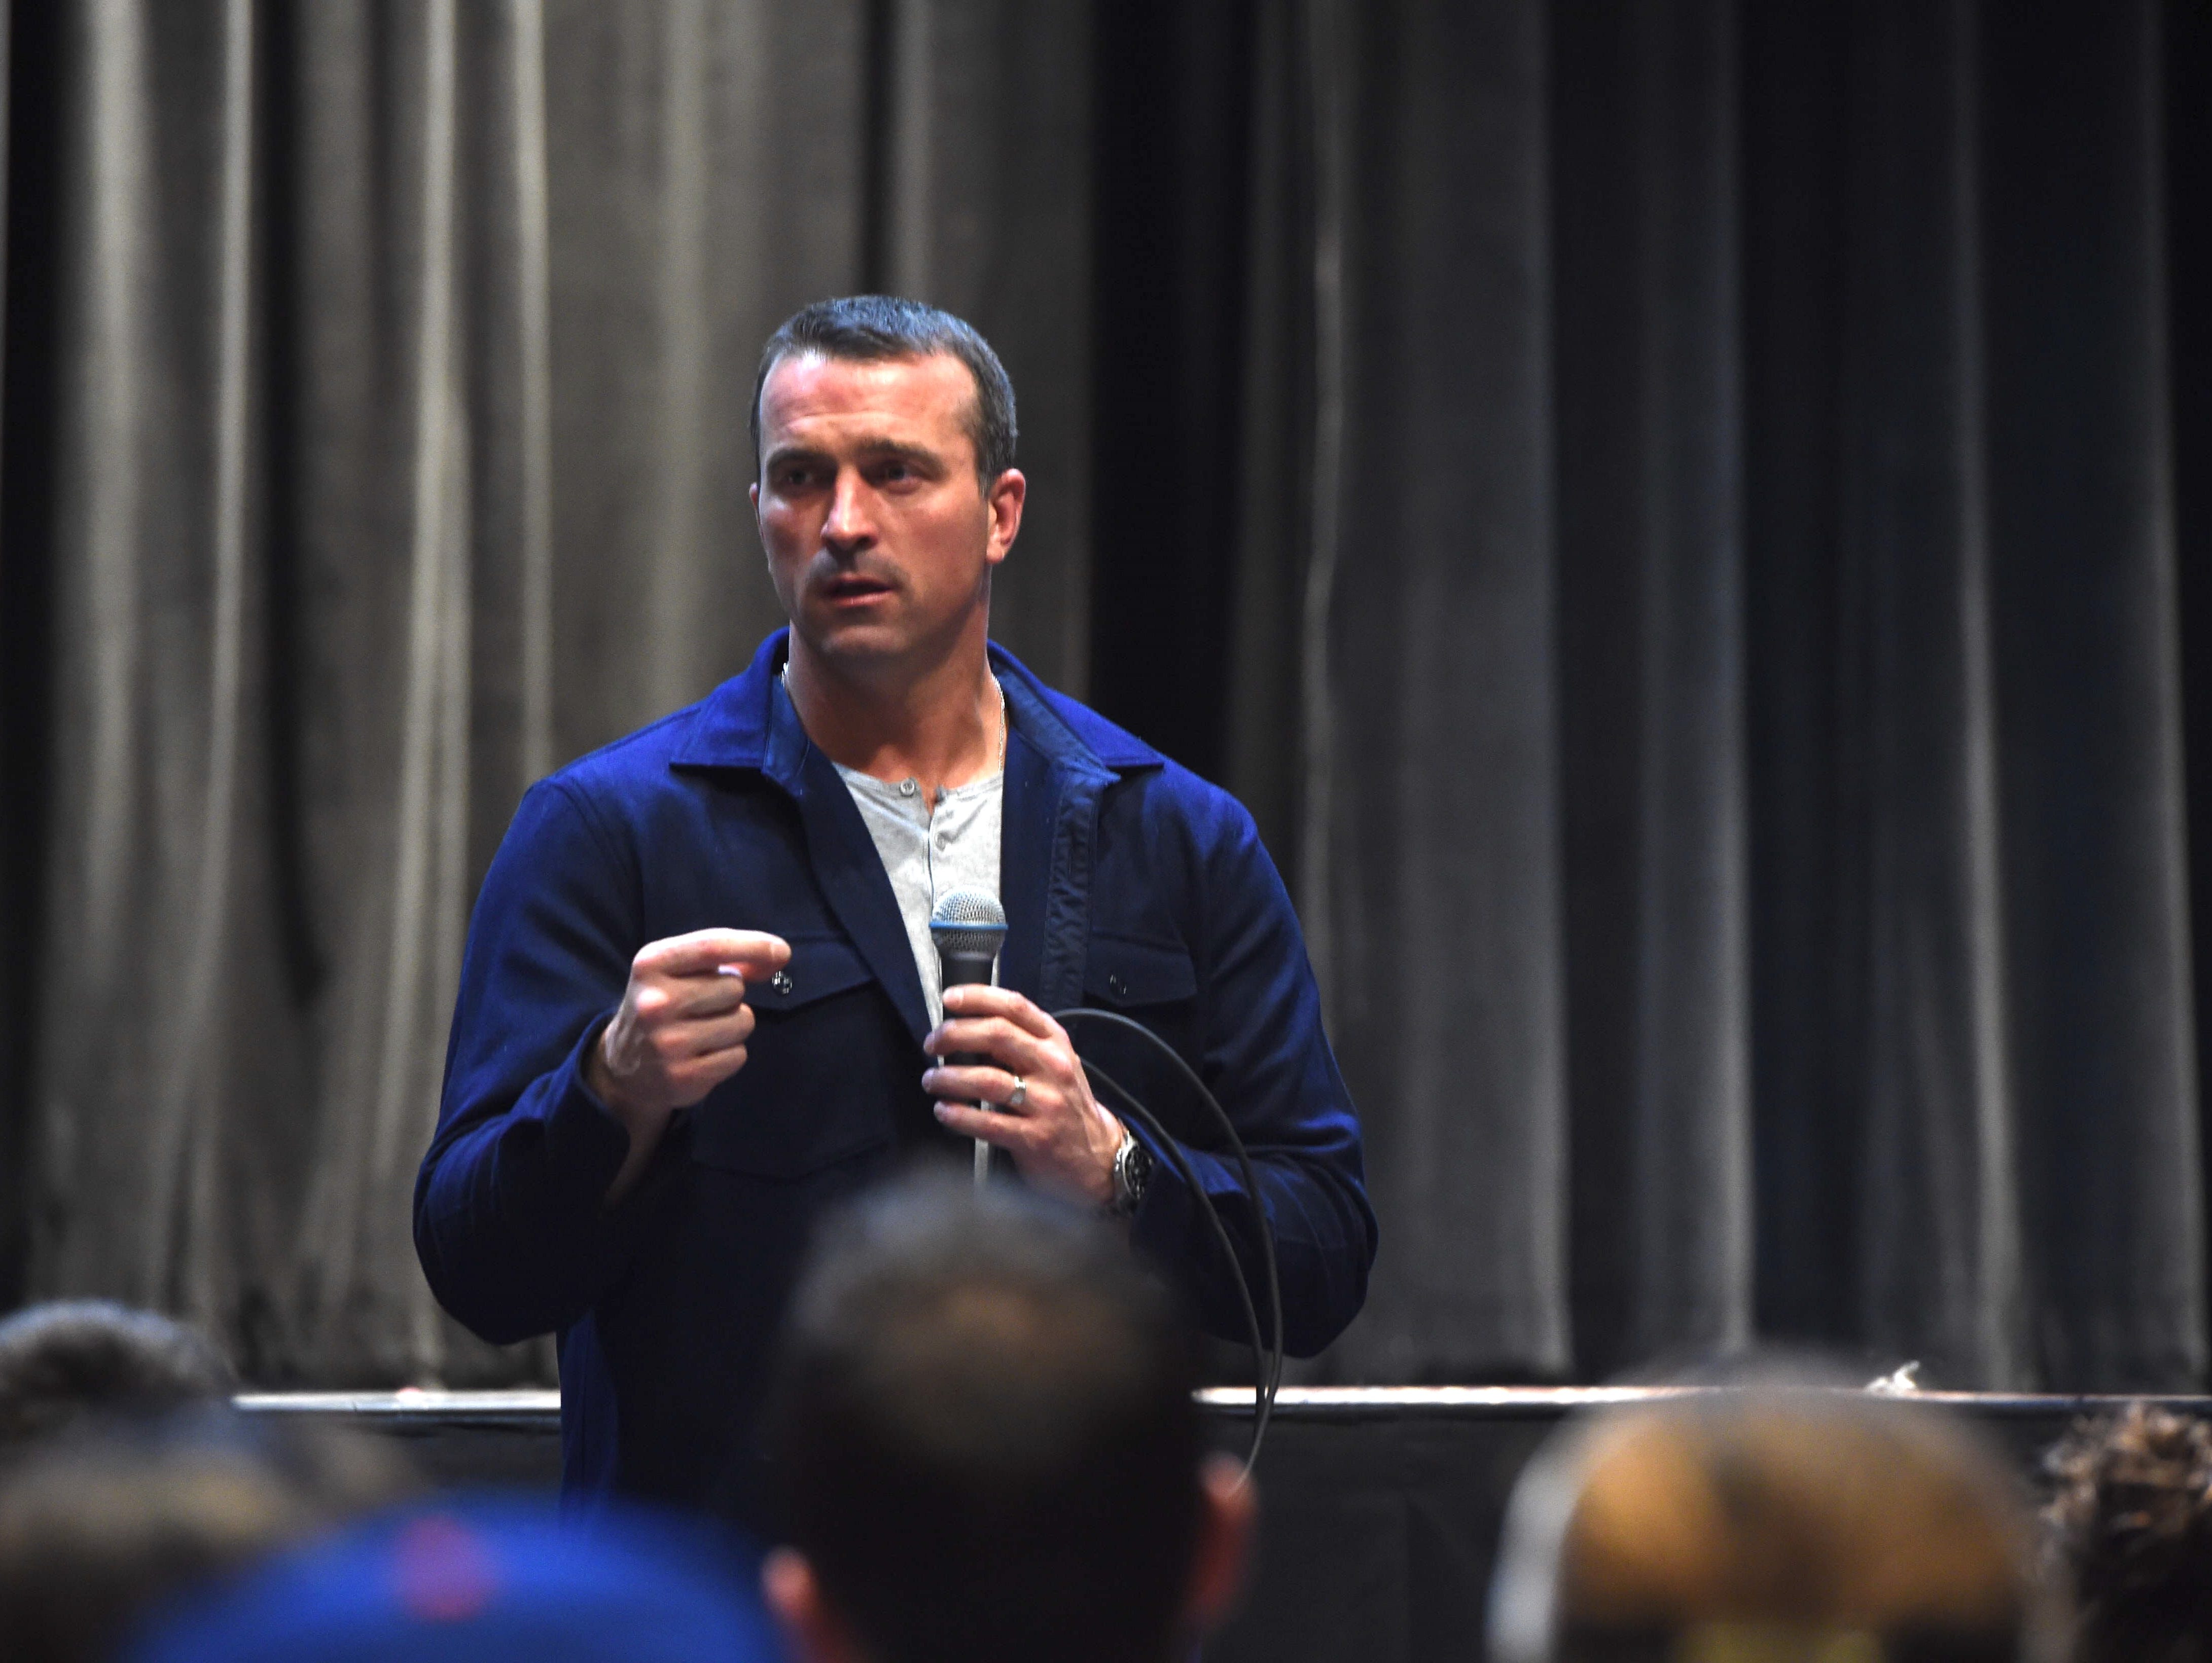 Former NBA player Chris Herren spoke about his history of drug abuse before a large audience at Arlington High School on Thursday.